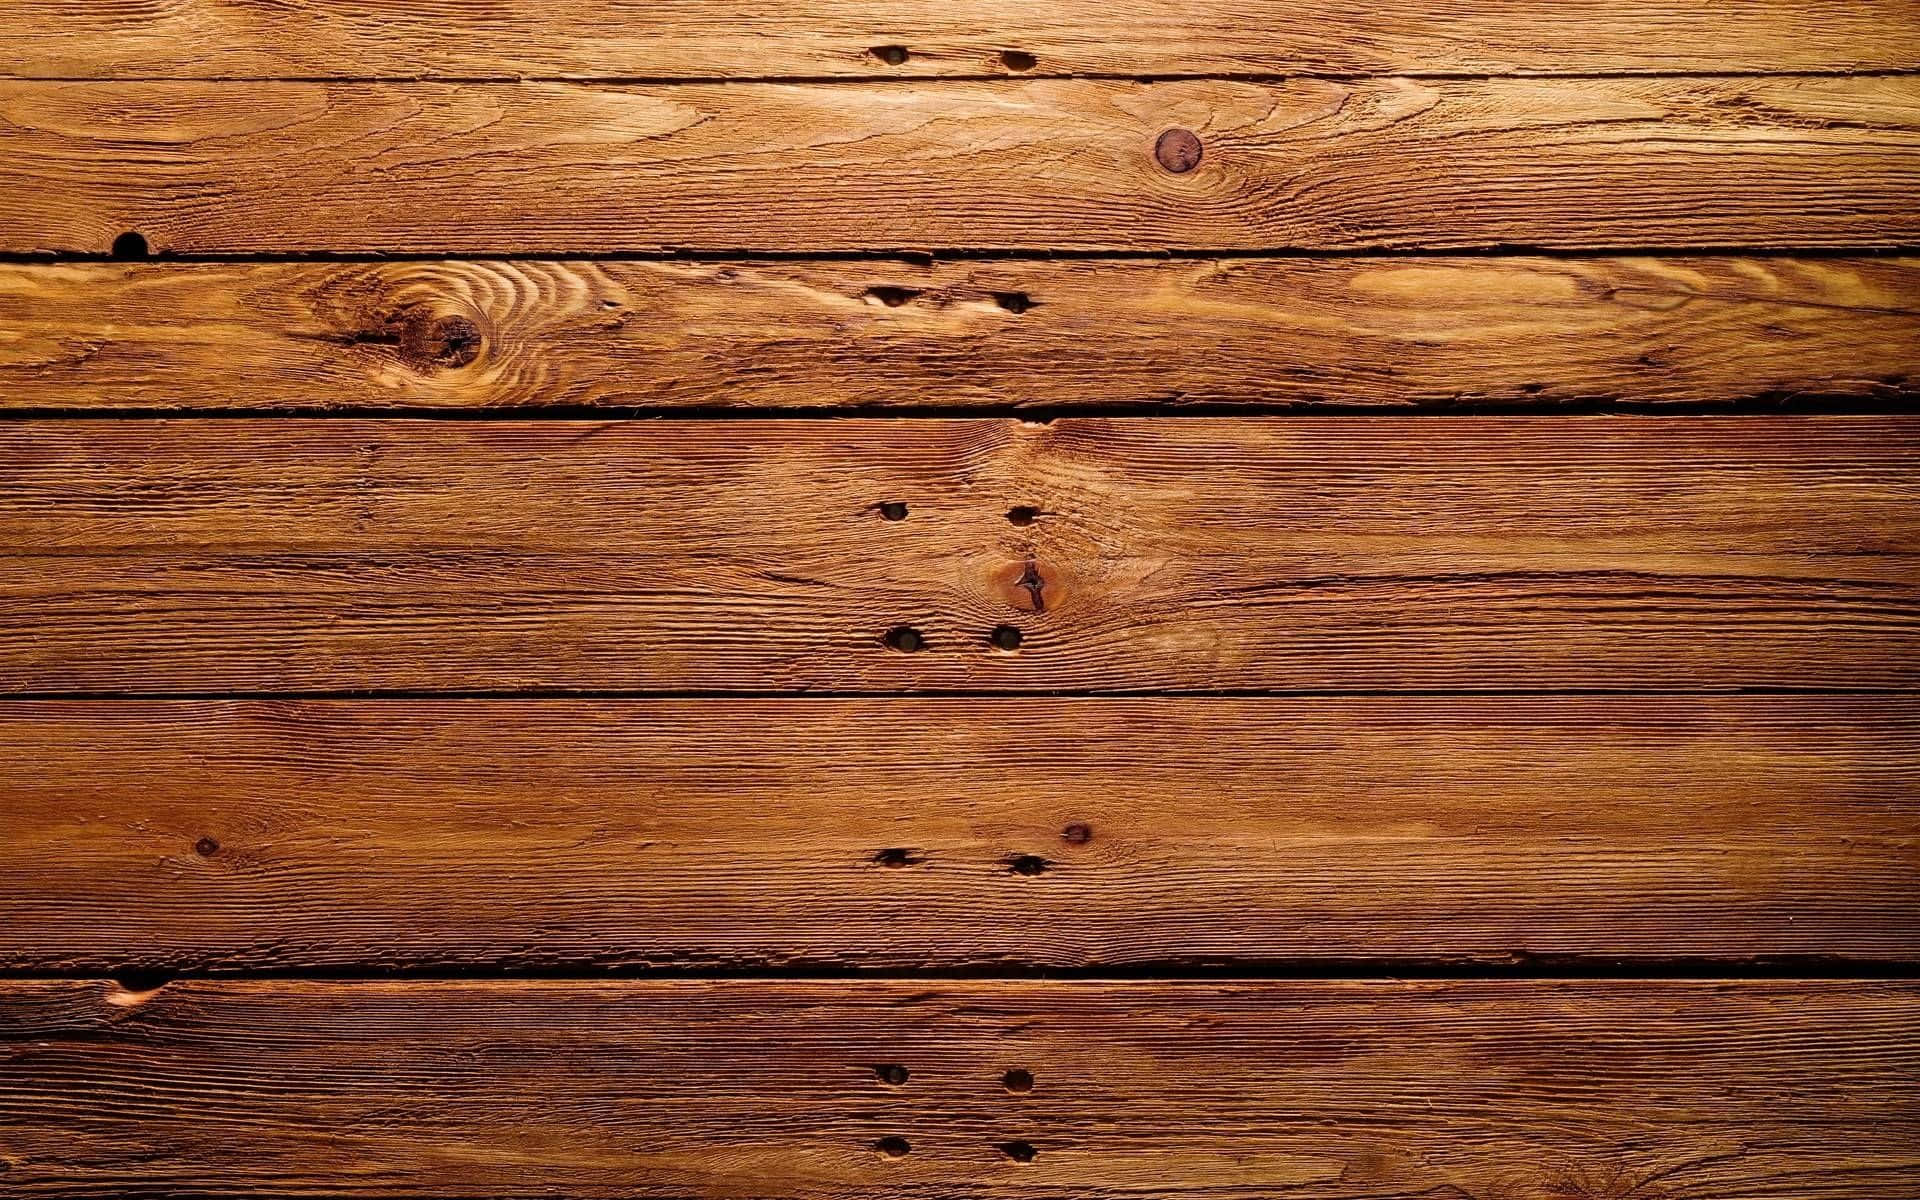 A Wooden Plank With Holes